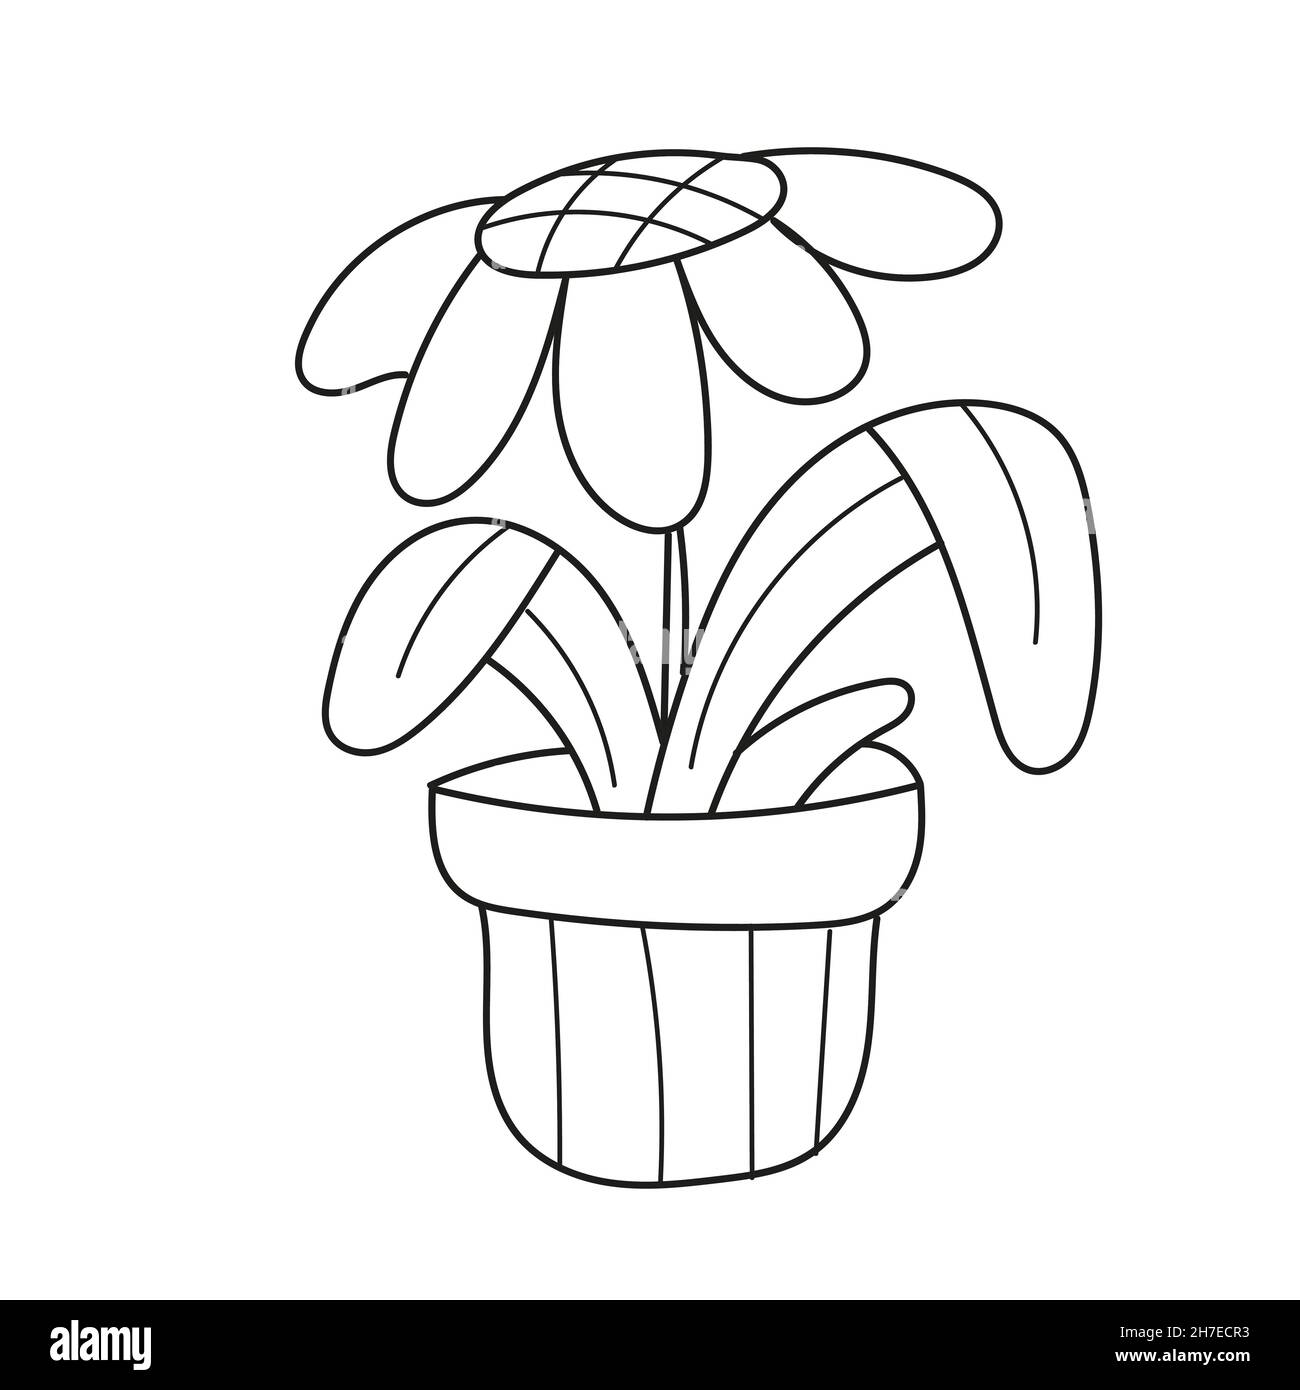 Simple coloring page. Cute Daisy Flower plant, hand drawn stock vector ...